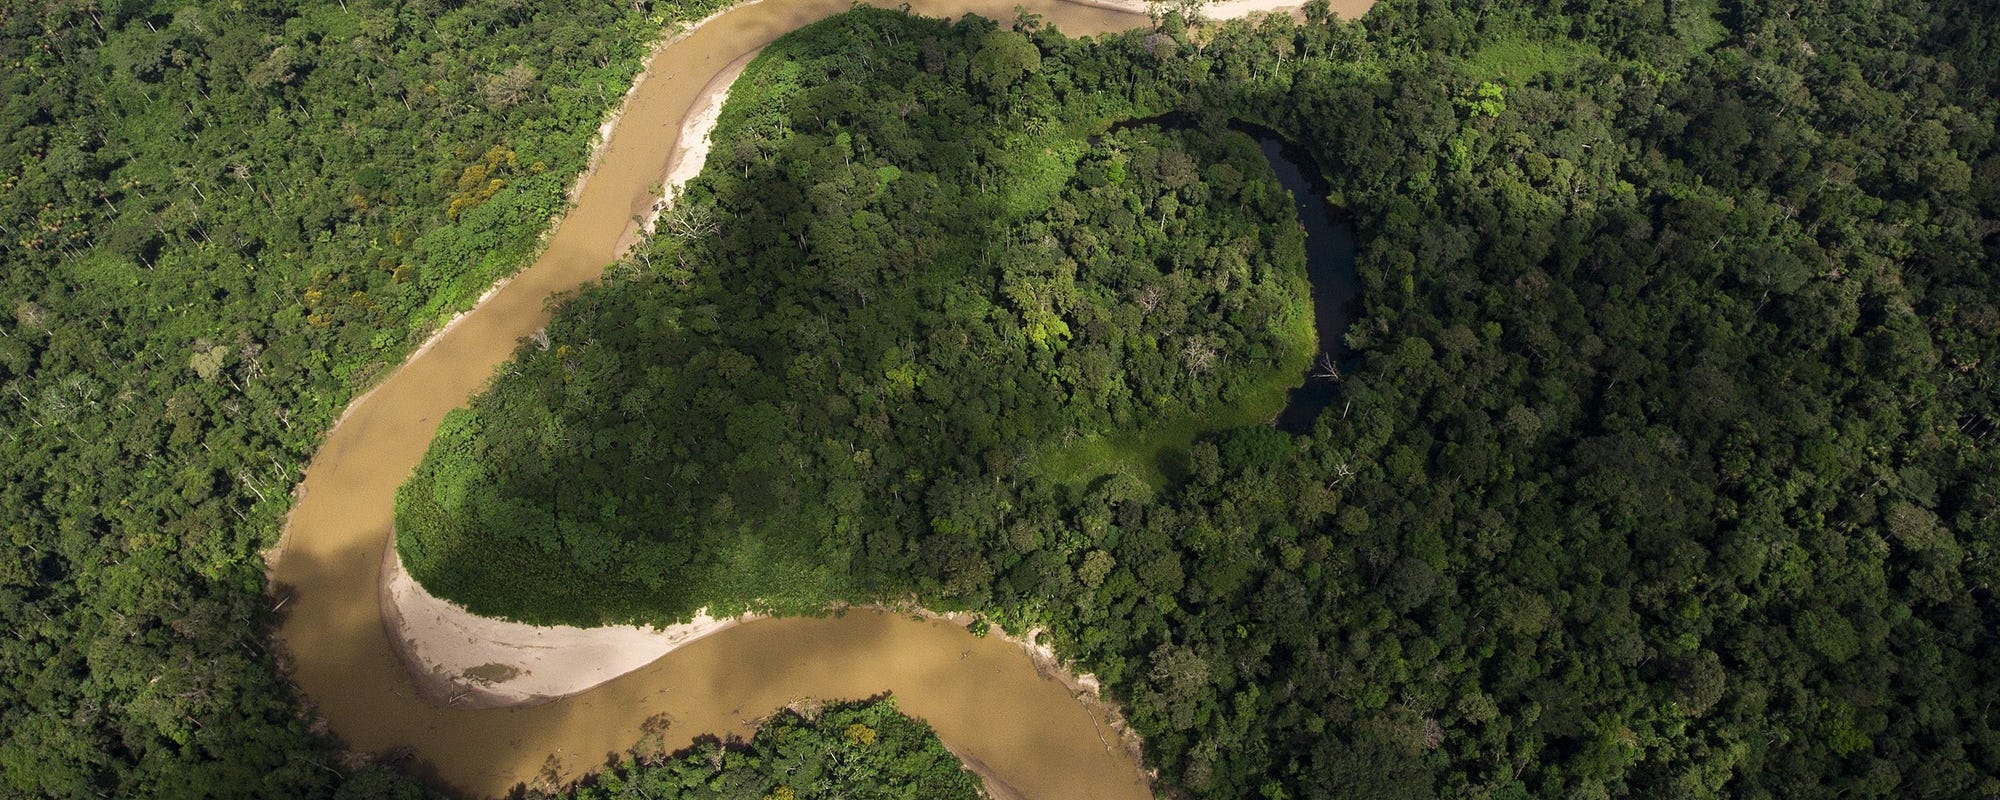 I Am Amazon Discover your connection to the rainforest with Google Earth